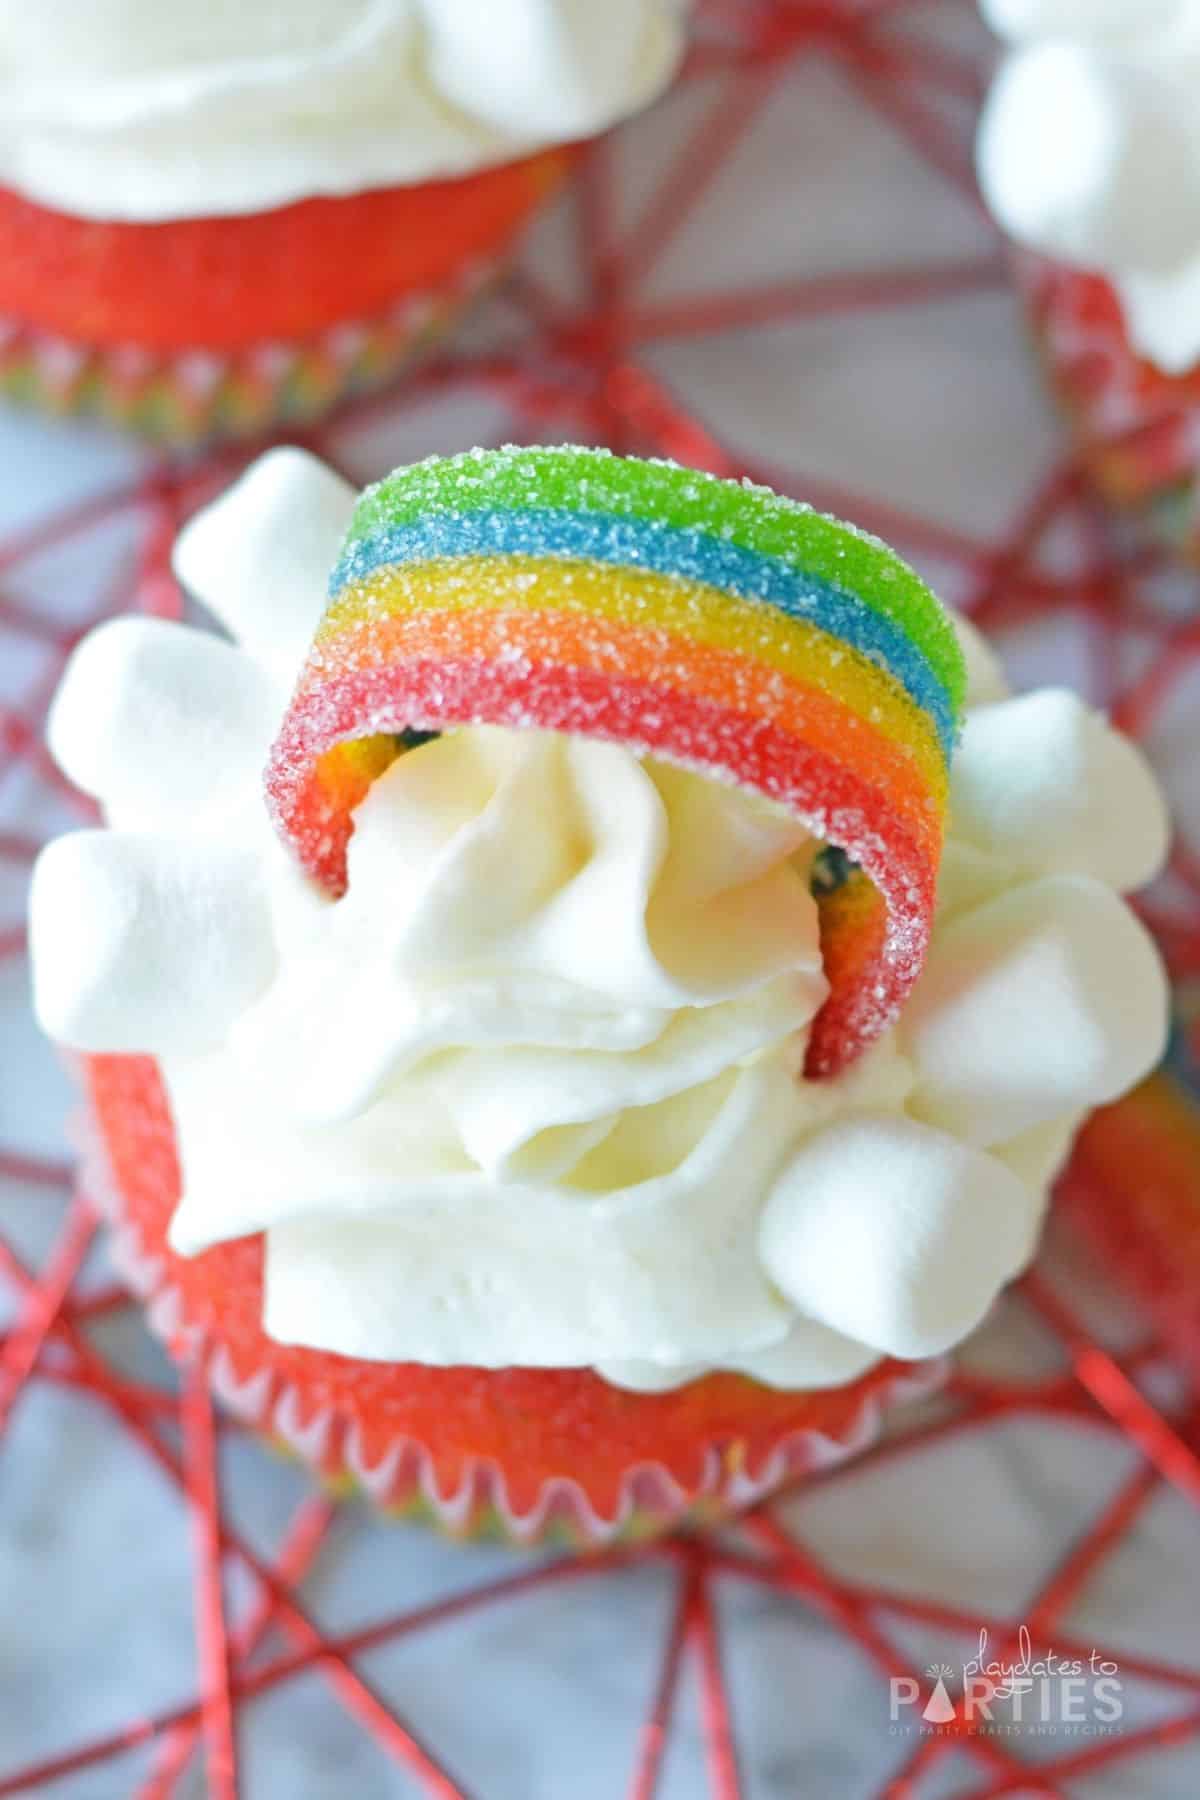 Overhead view of a cupcake with a rainbow topper and mini marshmallows.